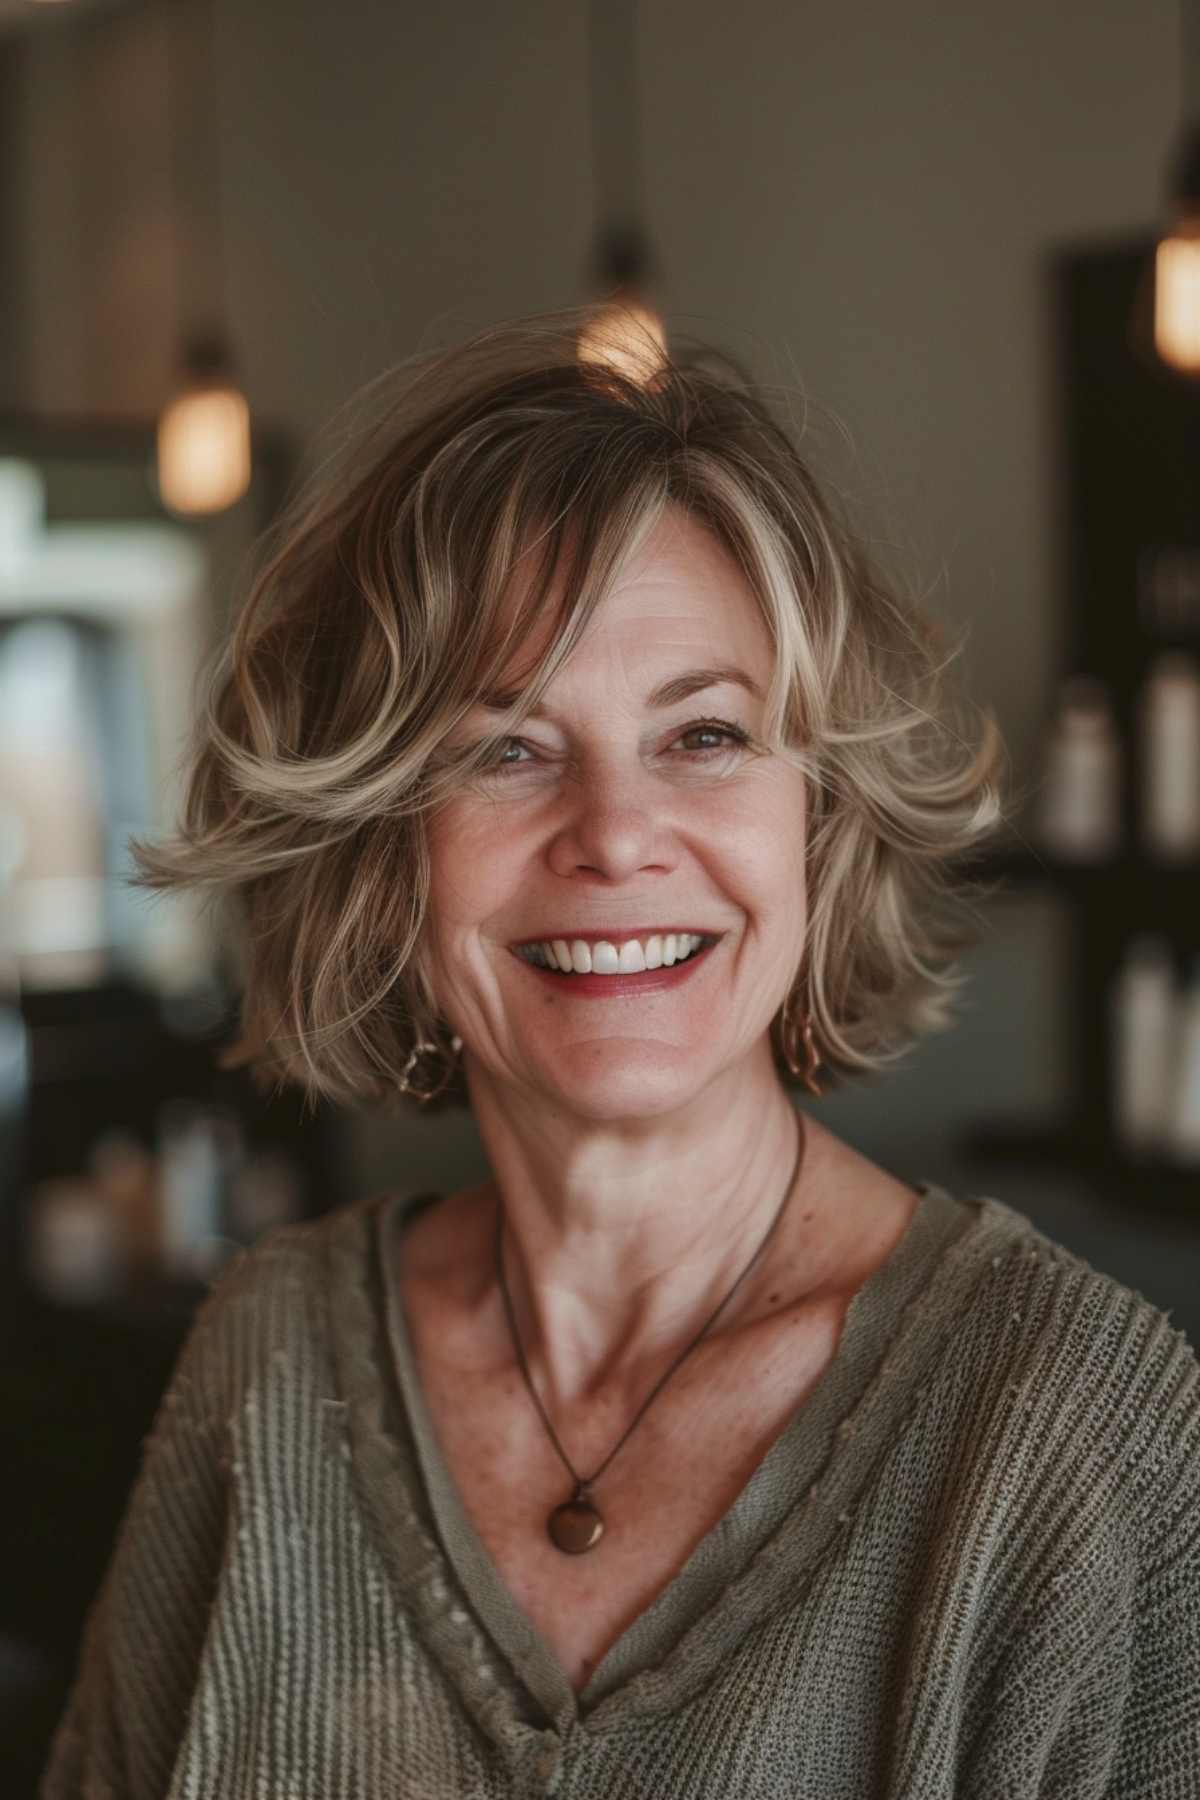 An older woman with an inverted teacup bob hairstyle featuring messy layers.